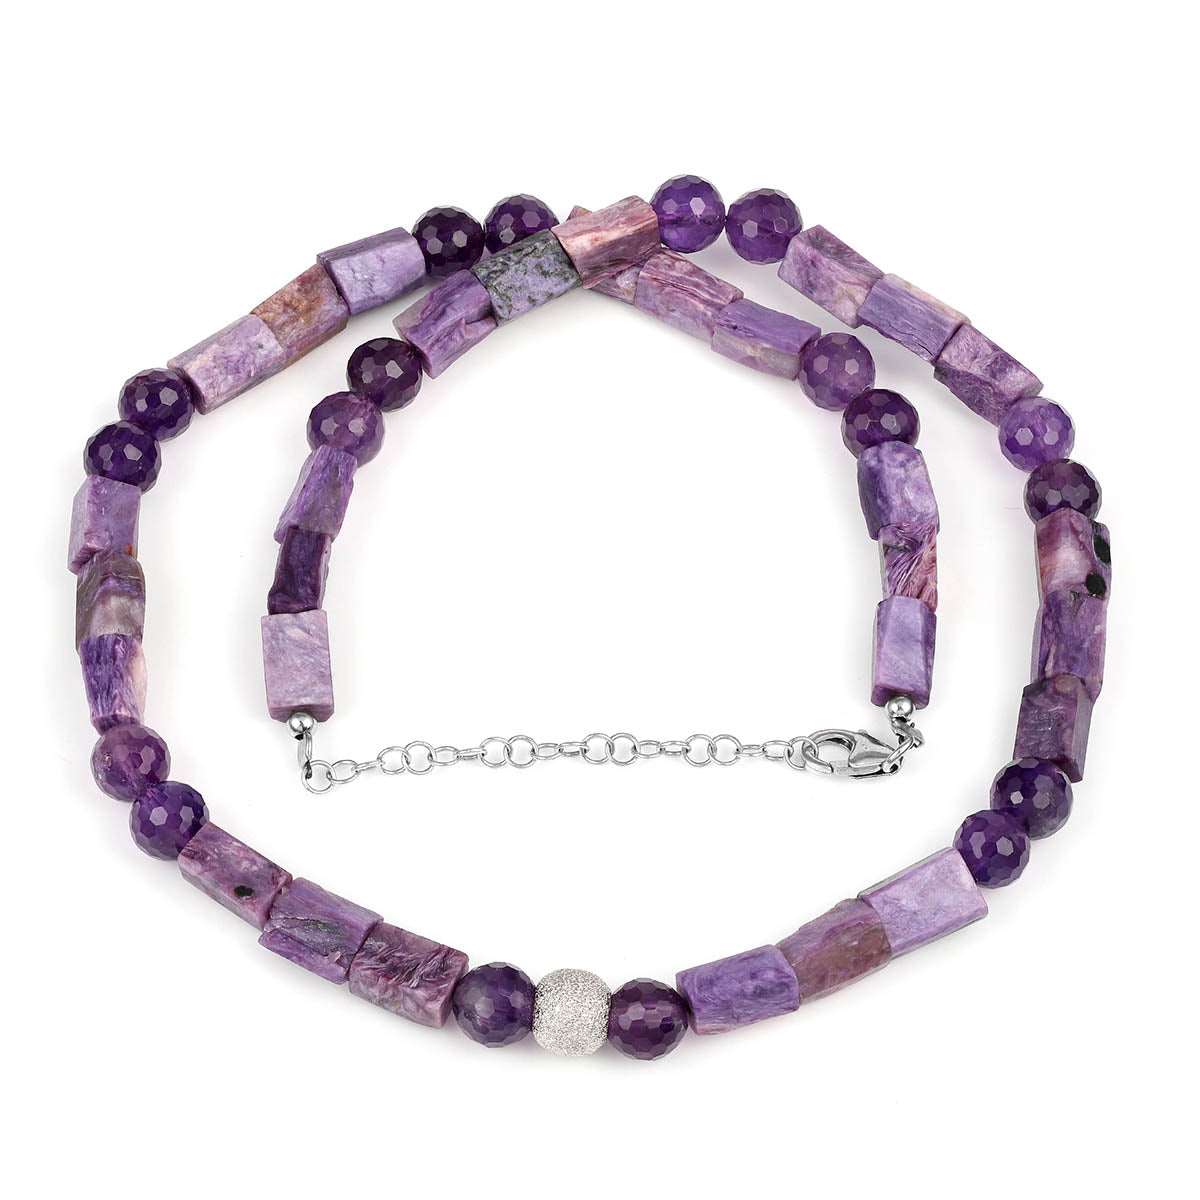 Amethyst and Charoite Silver Necklace